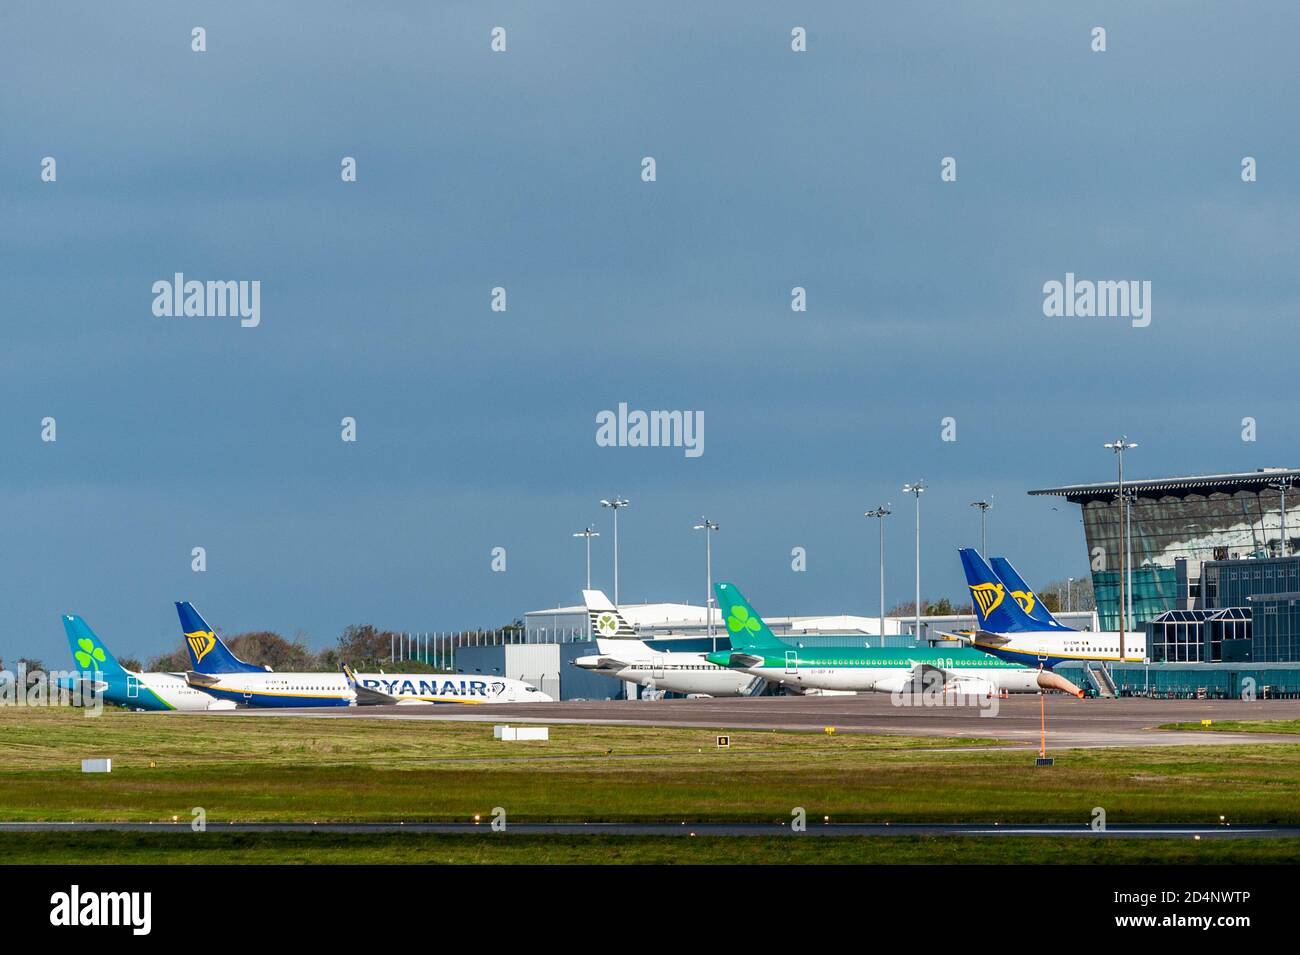 Cork, Ireland. 10th Oct, 2020. Aer Lingus and Ryanair aircraft sit redundant on the tarmac at Cork Airport as Ireland's Level 3 restrictions hit international travel hard. From Monday 12th Oct, the government has said there will be no foreign countries on the Green Travel List, meaning anyone flying into Ireland will have to self-isolate for 14 days. The next review will be on Tursday 15th October. Credit: AG News/Alamy Live News Stock Photo